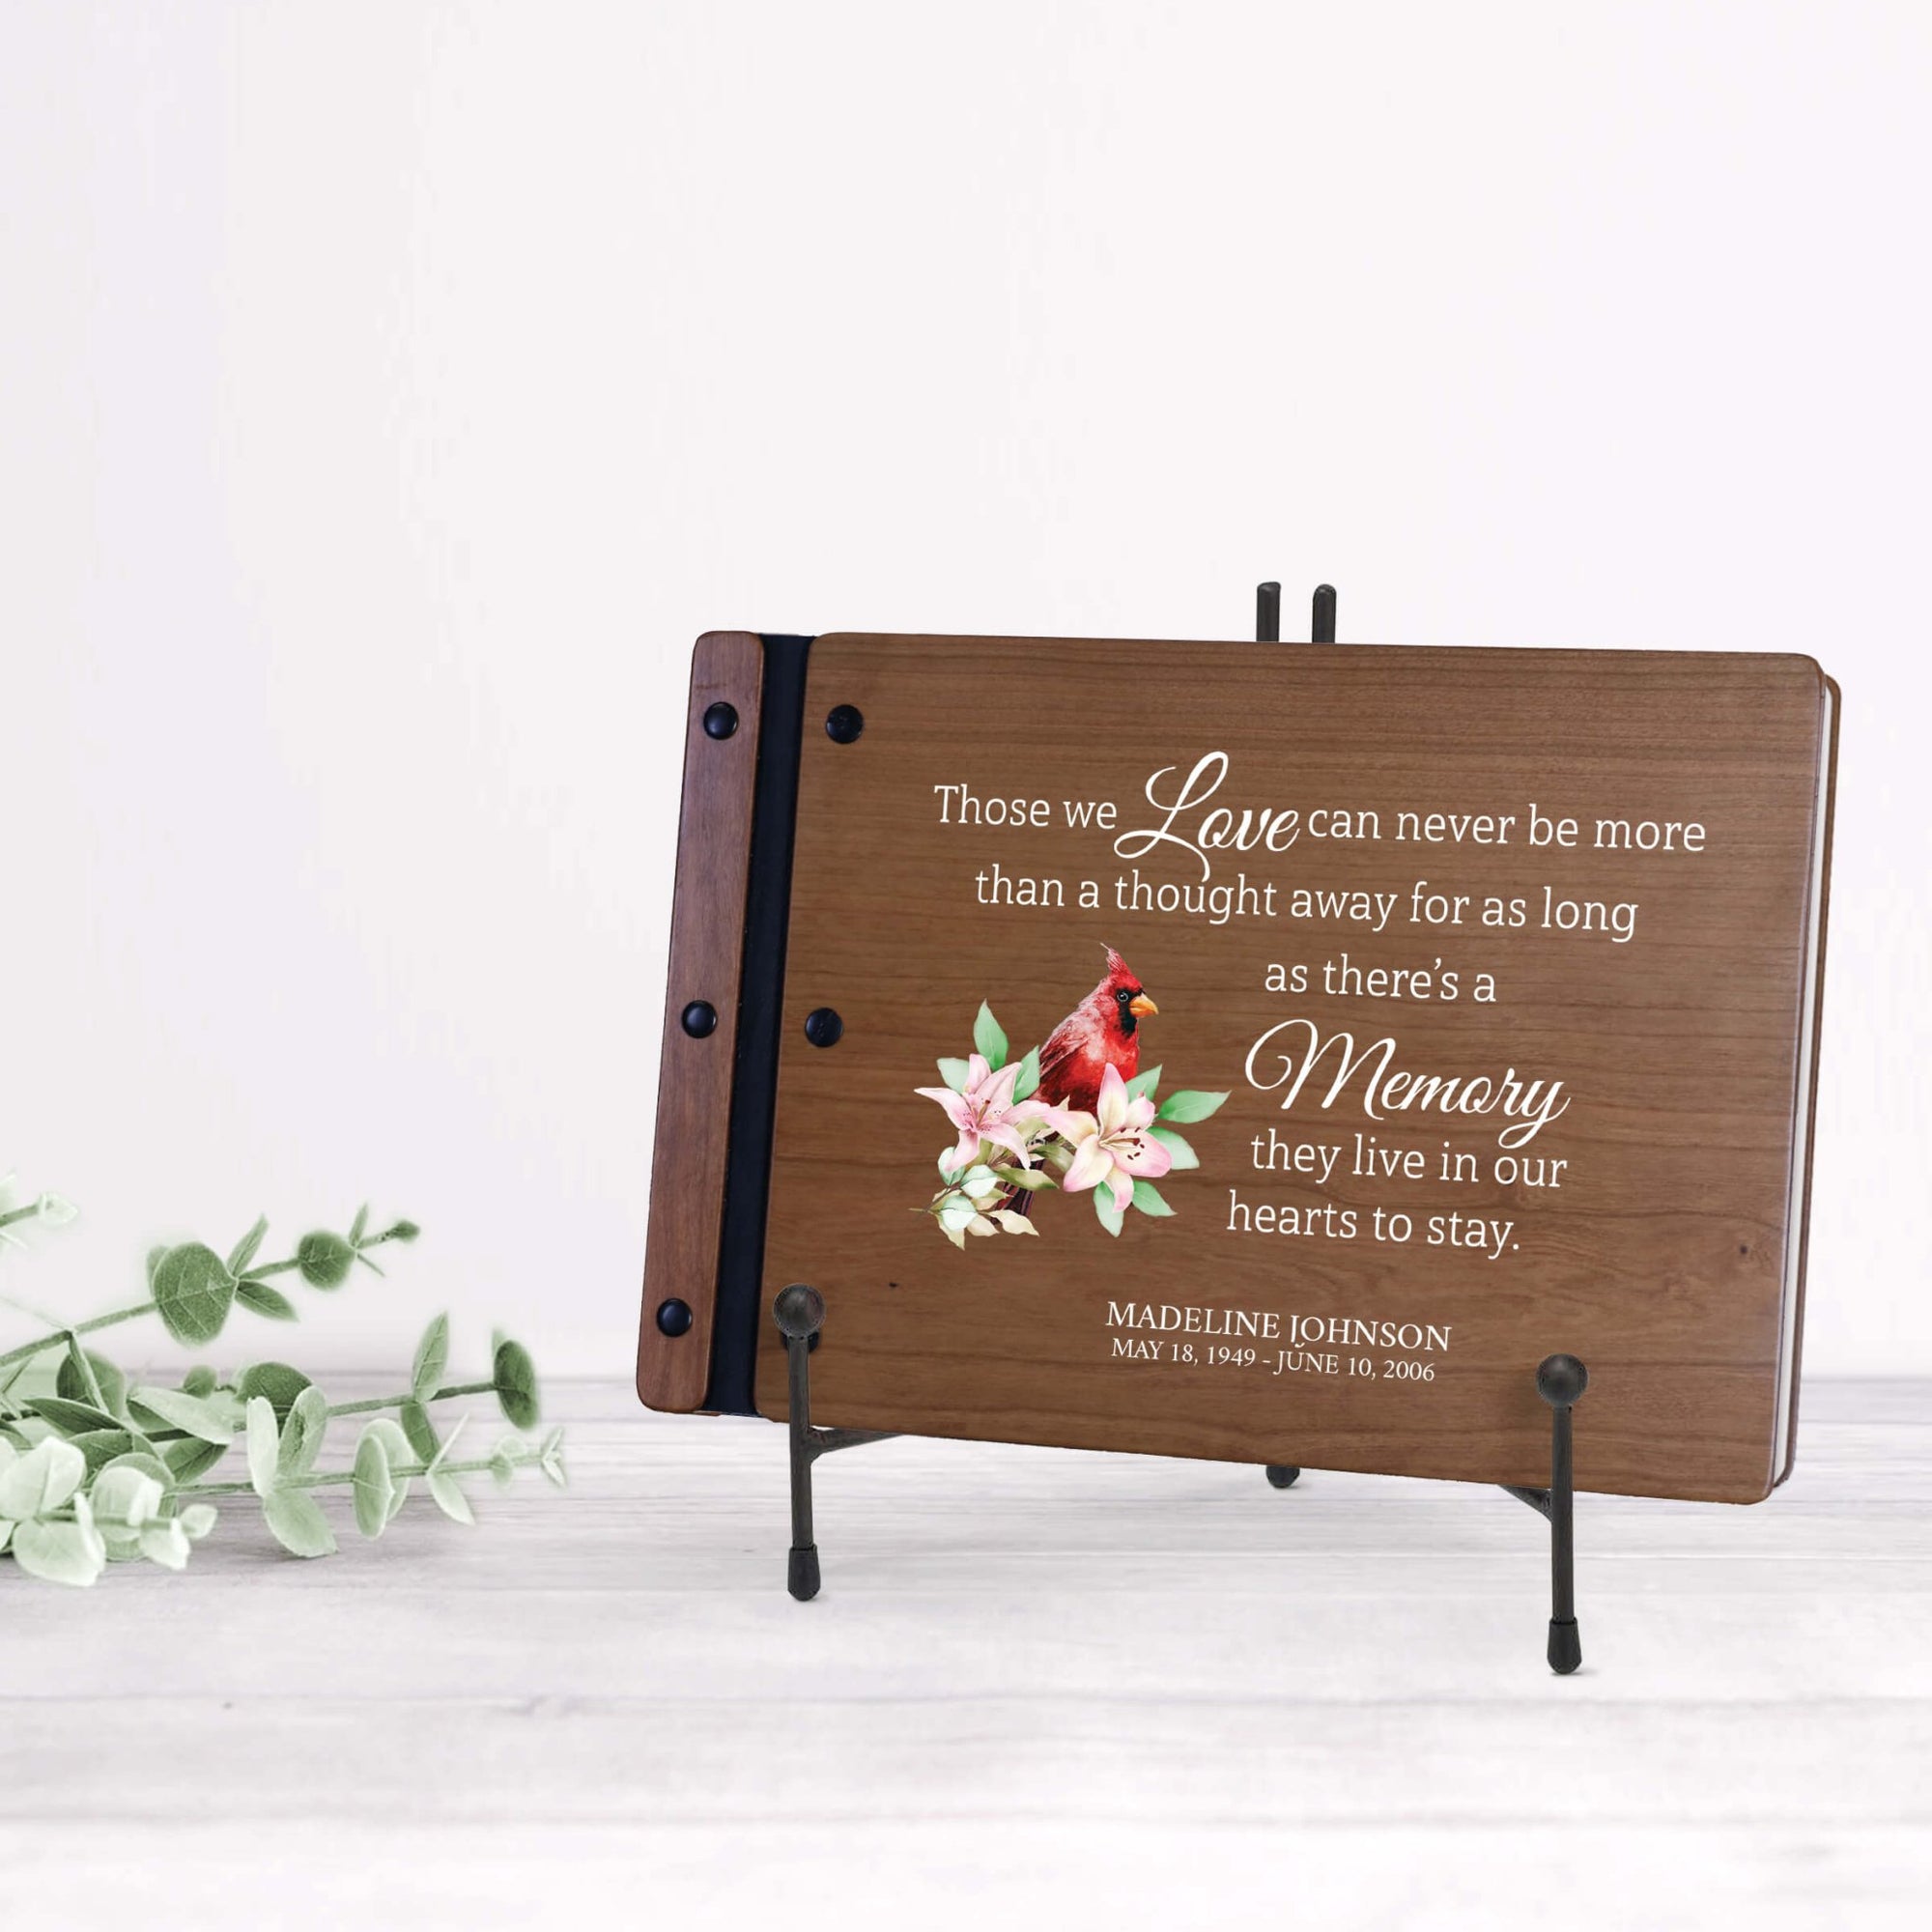 Personalized Funeral Wooden Guestbook for Memorial Service - Those We Love Can Never - LifeSong Milestones